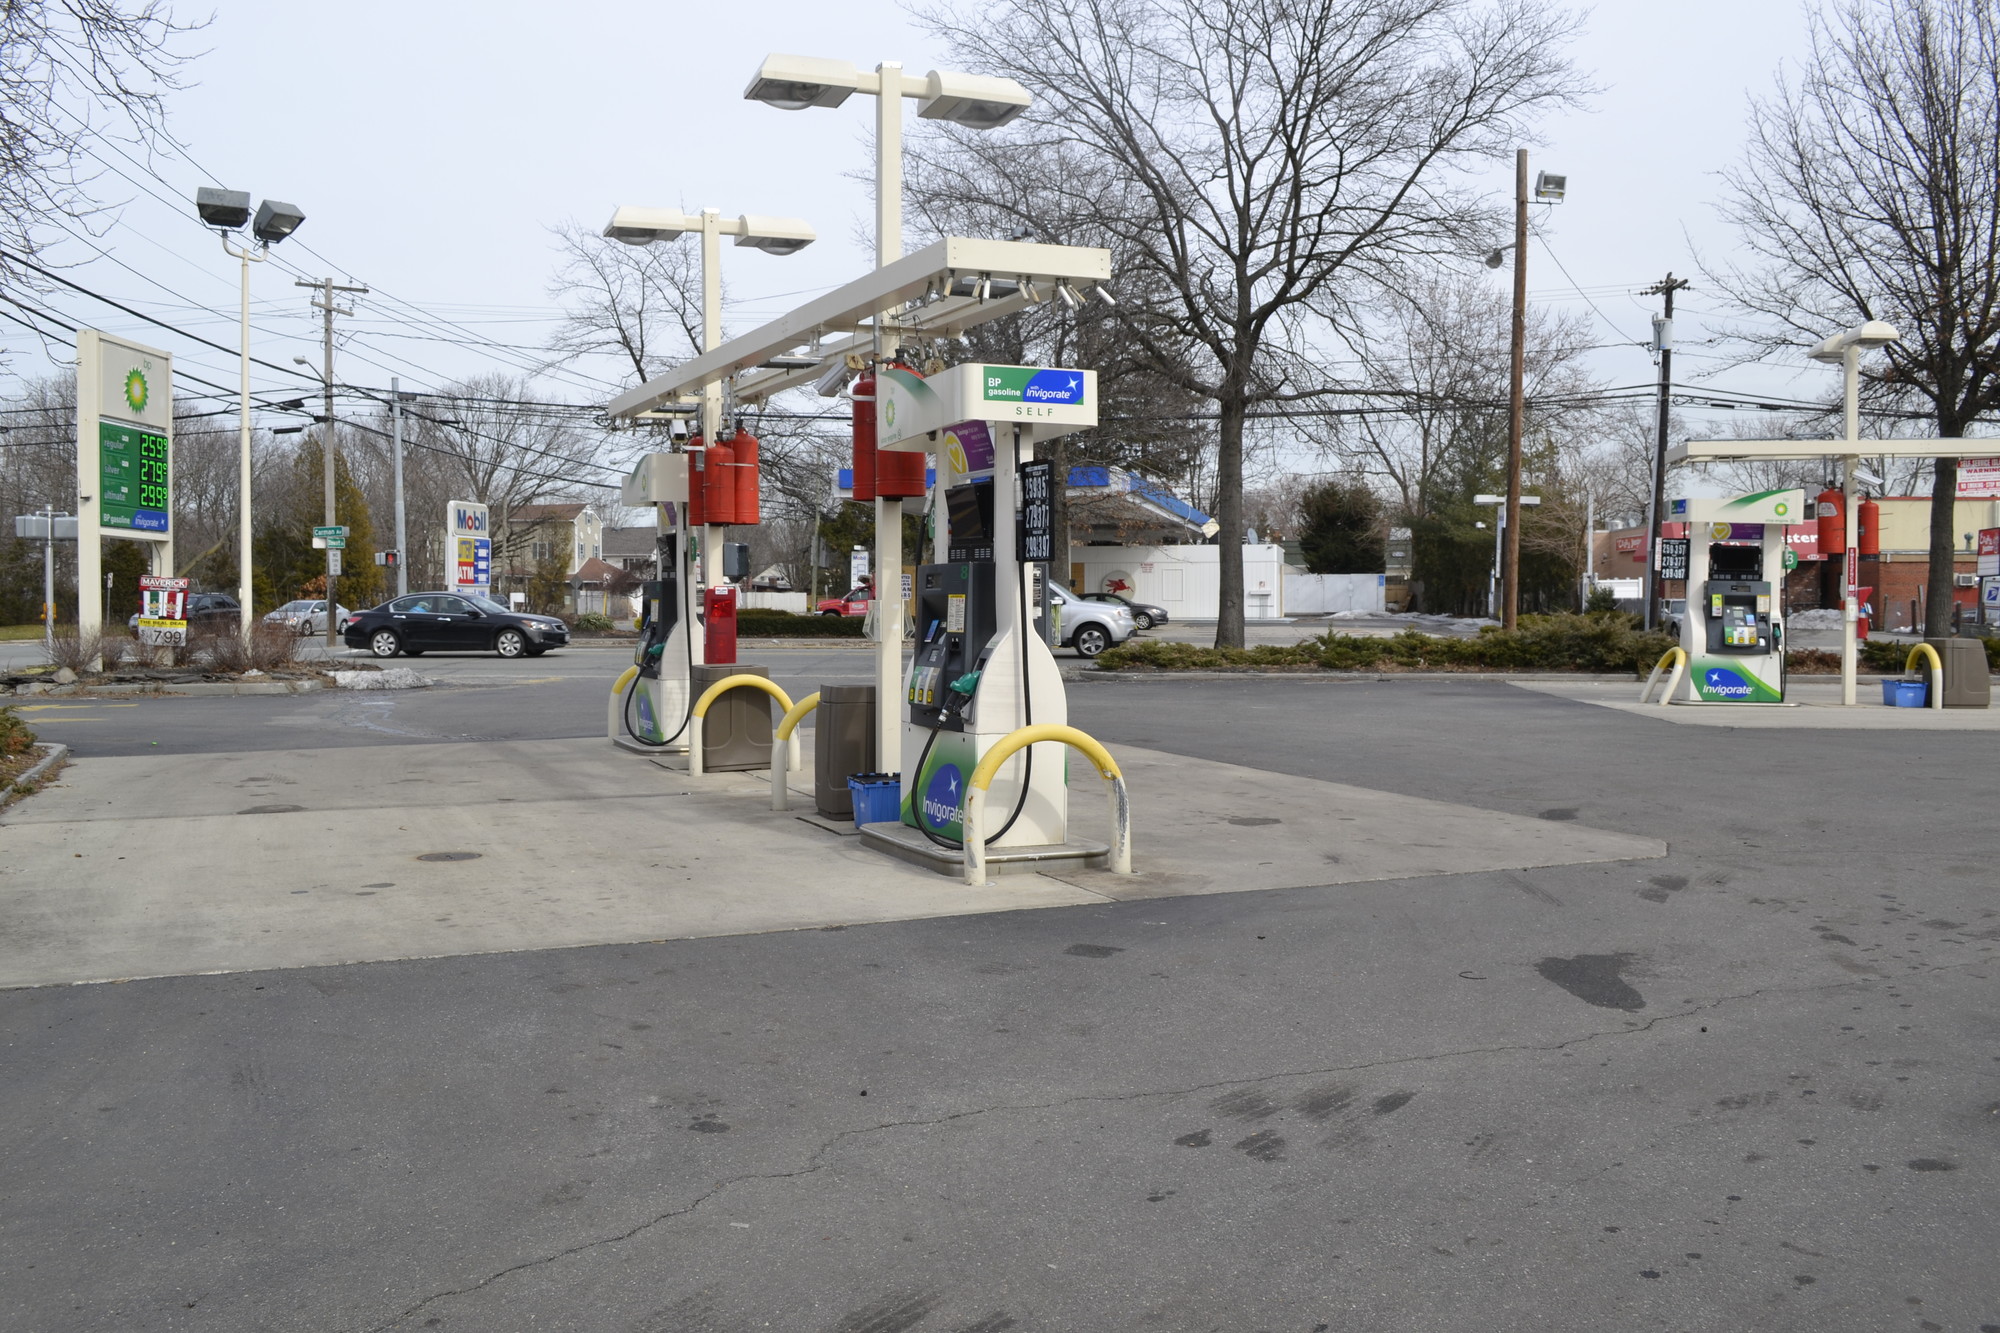 The station, on 865 Carman Ave., was shut down for two weeks after it was discovered that its gas tank contained five inches of water — well above the legal limit of two, Nassau County officials said. The station reopened on March 10.